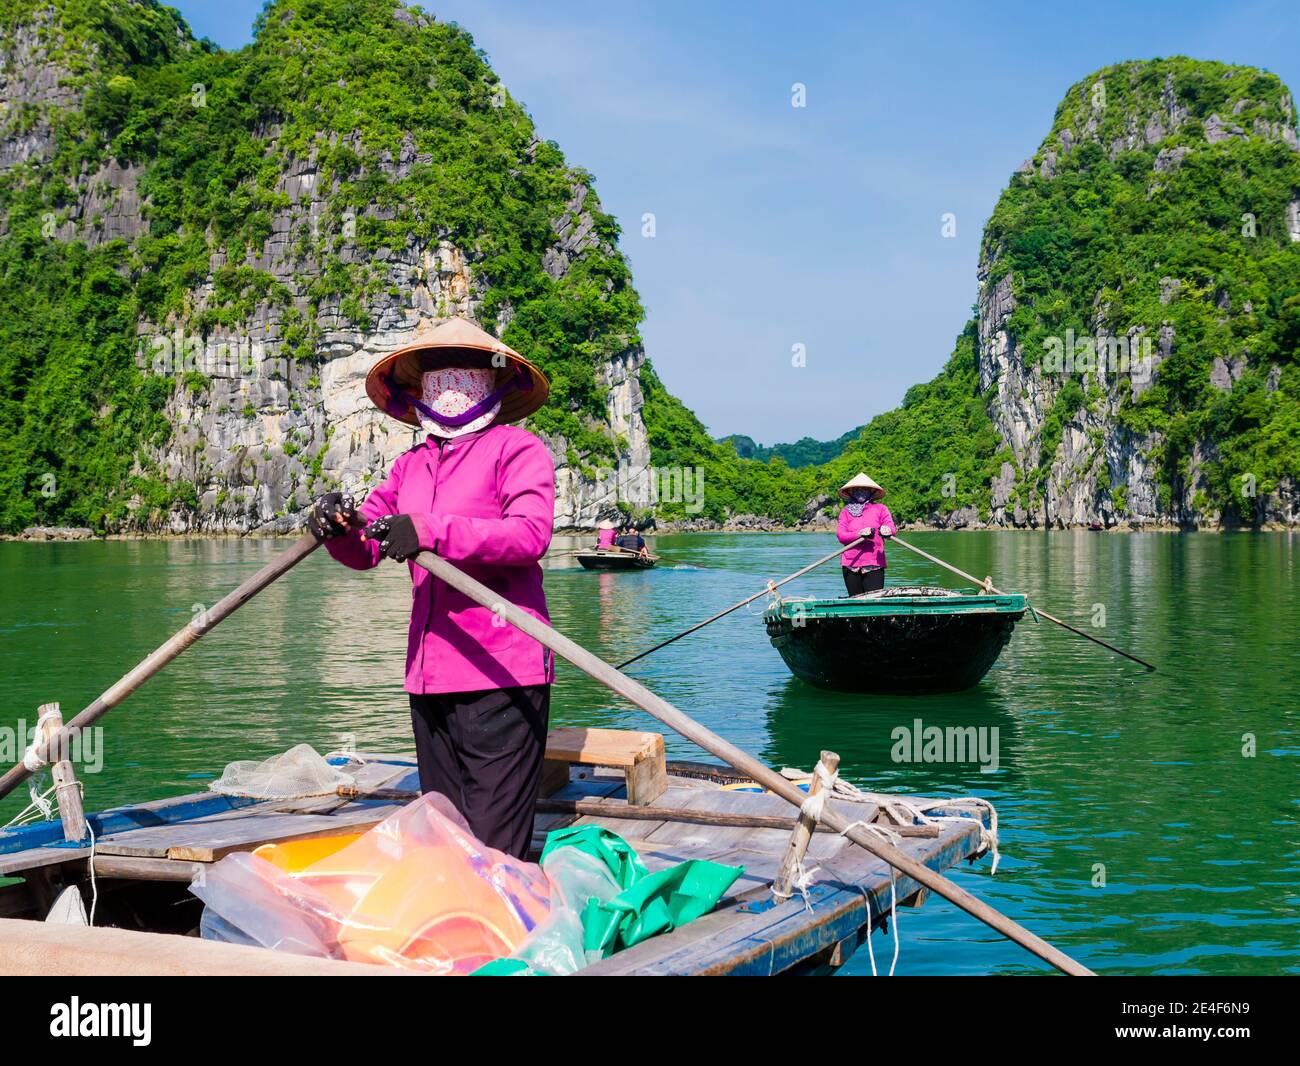 Local guides in typical purple uniforms and conical hats take tourists on a boat trip through the majestic limestone mountains of Halong bay, Vietnam Stock Photo